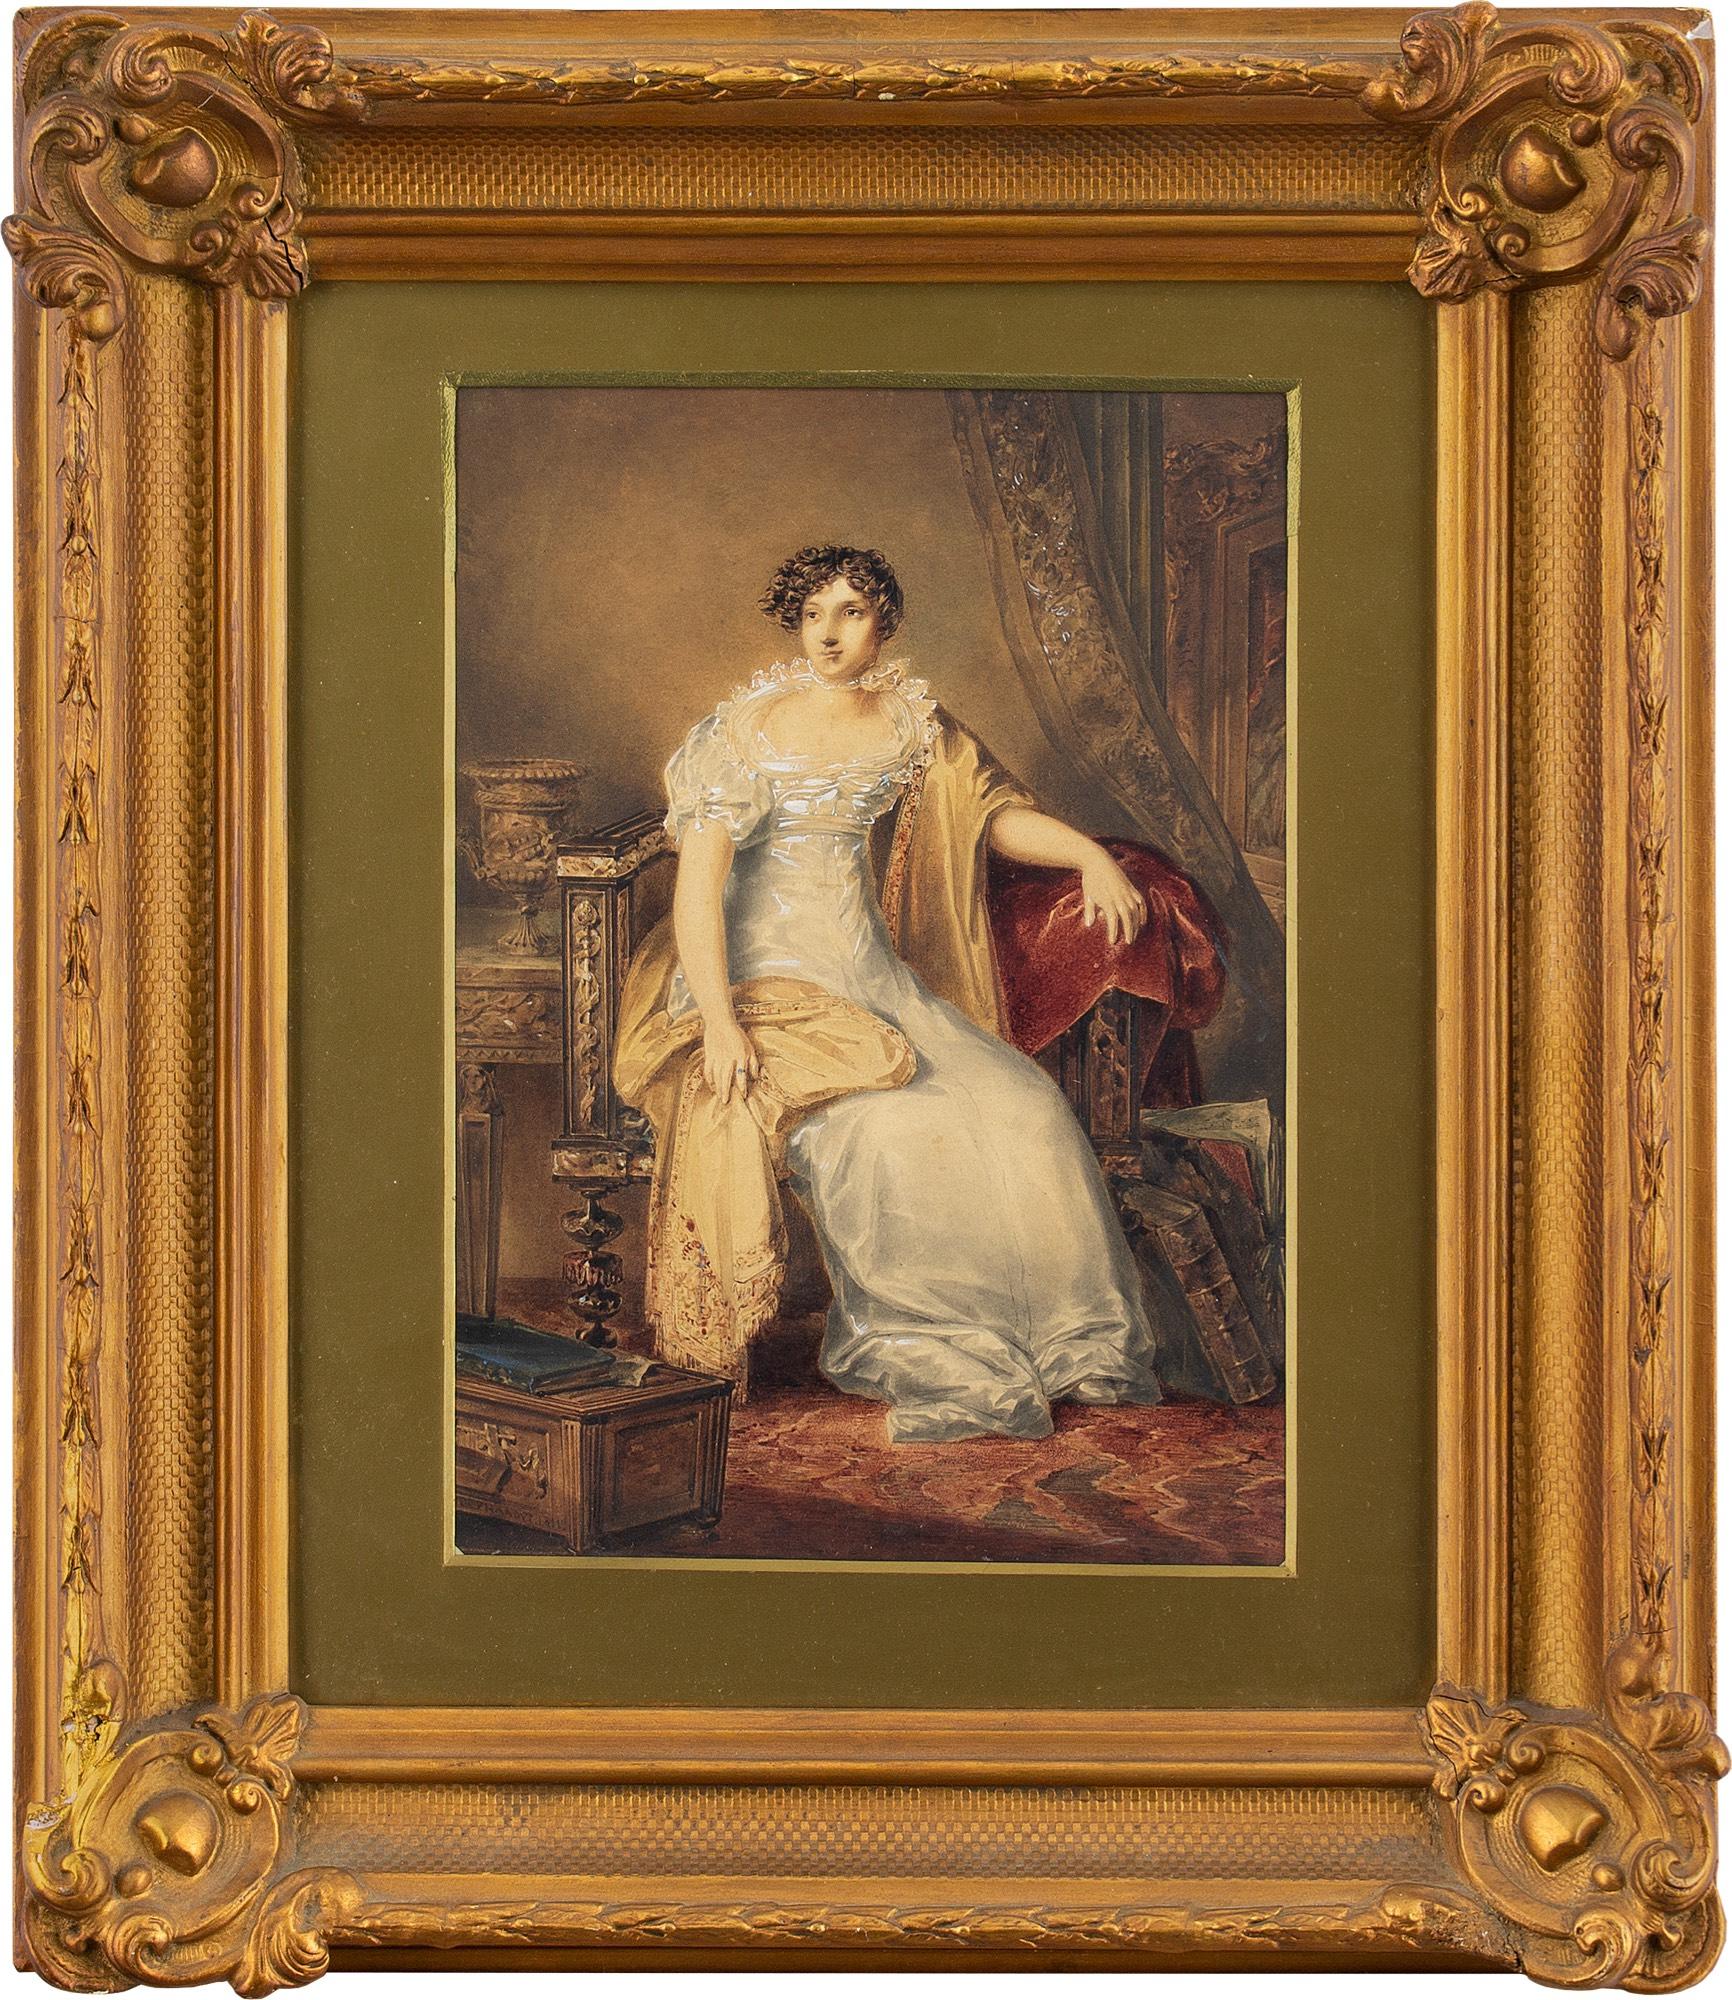 This charming portrait of Miss Smernove by British artist, James Stephanoff (1784-1874) is rendered with a masterful touch. It depicts the confident young lady wearing a white high-waisted neo-classical dress with a gold wrap. Her hair is styled